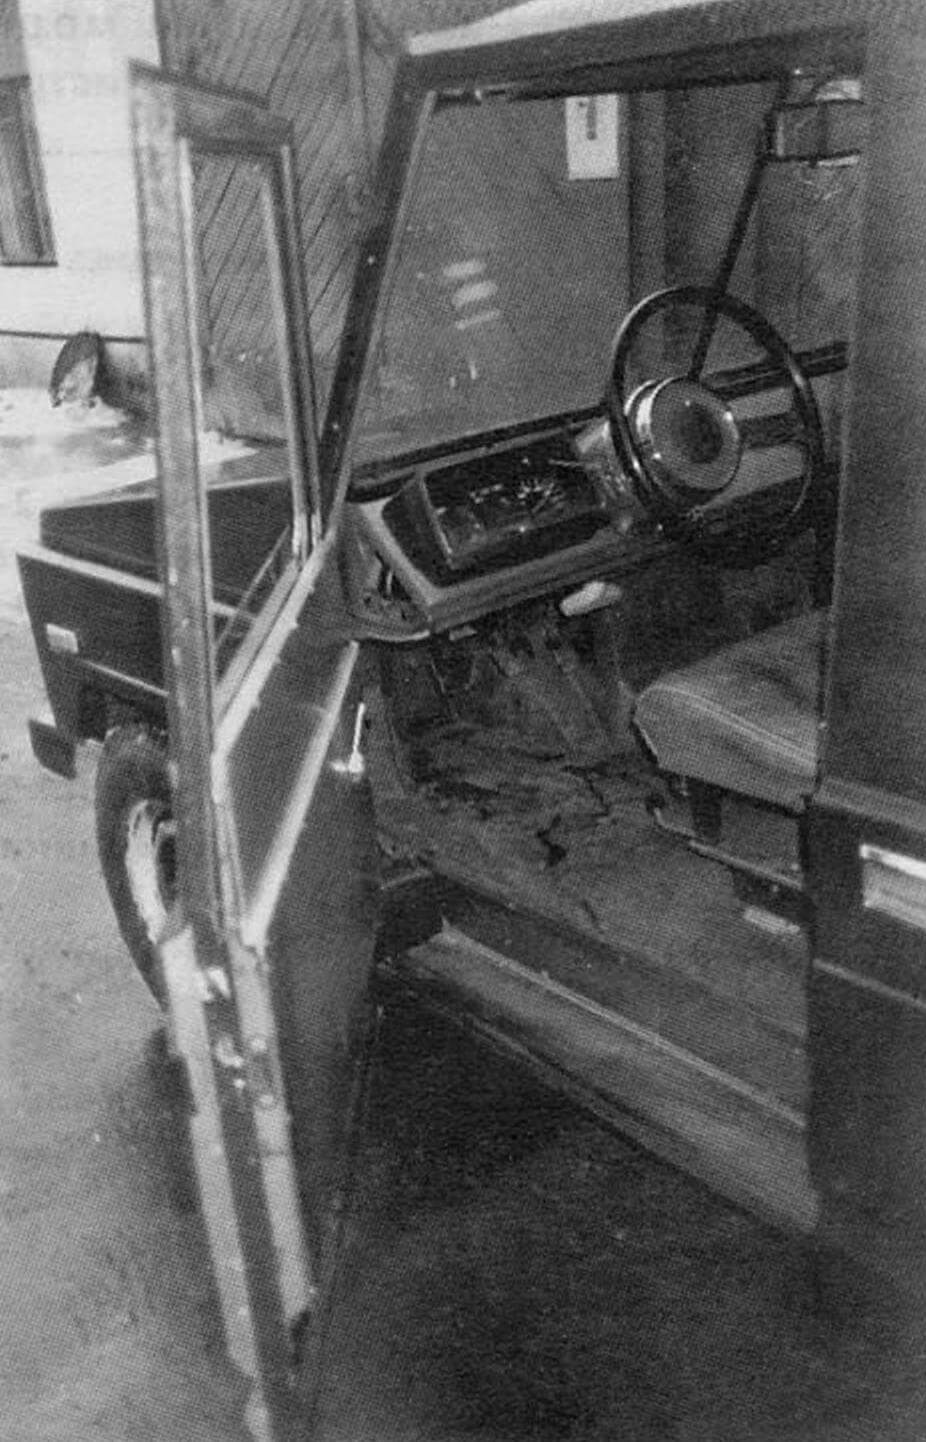 Driver's seat. The instrument panel is small, and everything necessary to control the operation of the machine units is on it.